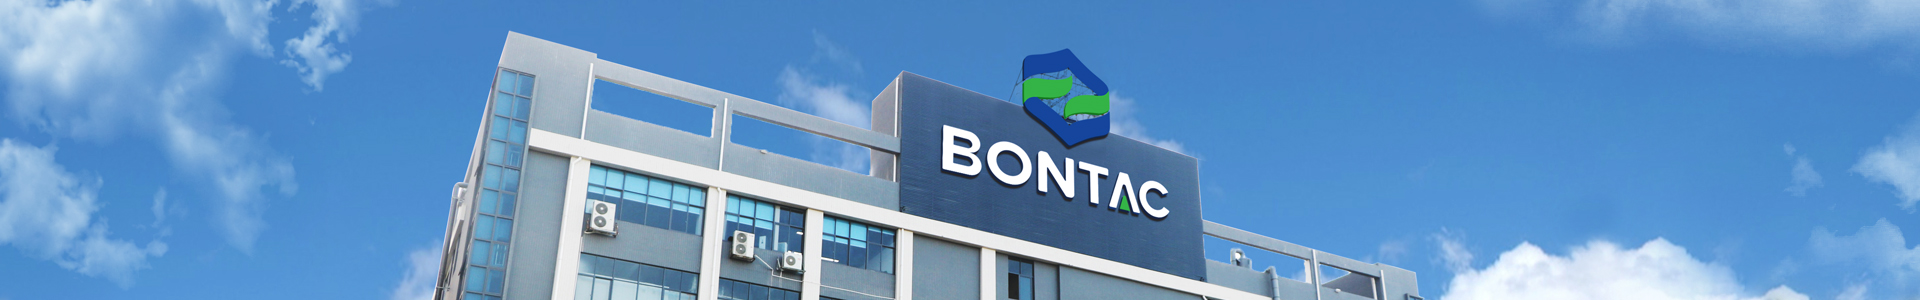 BONTAC Shines at CPHI China: Dr. Zhang Provides Insight into the NMN Industry